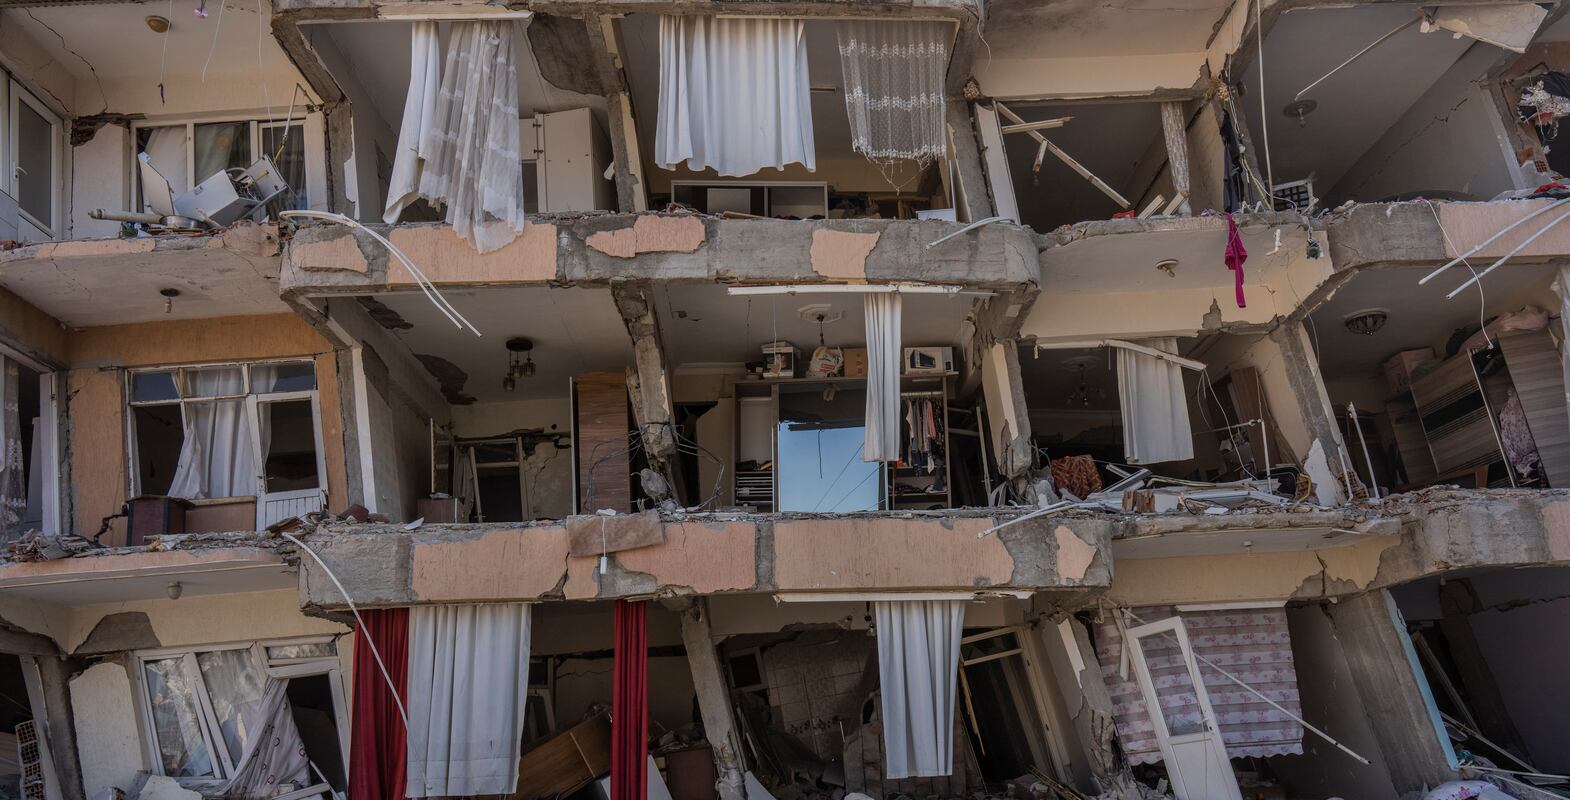 View of a building destroyed during the earthquakes in Antakya, southeastern Turkey, Wednesday, Feb.  15, 2023.  The earthquakes that killed more than 39,000 people in southern Turkey and northern Syria is producing more grieving and suffering along with extraordinary rescues and appeals for aid.  (AP Photo / Bernat Armangue)